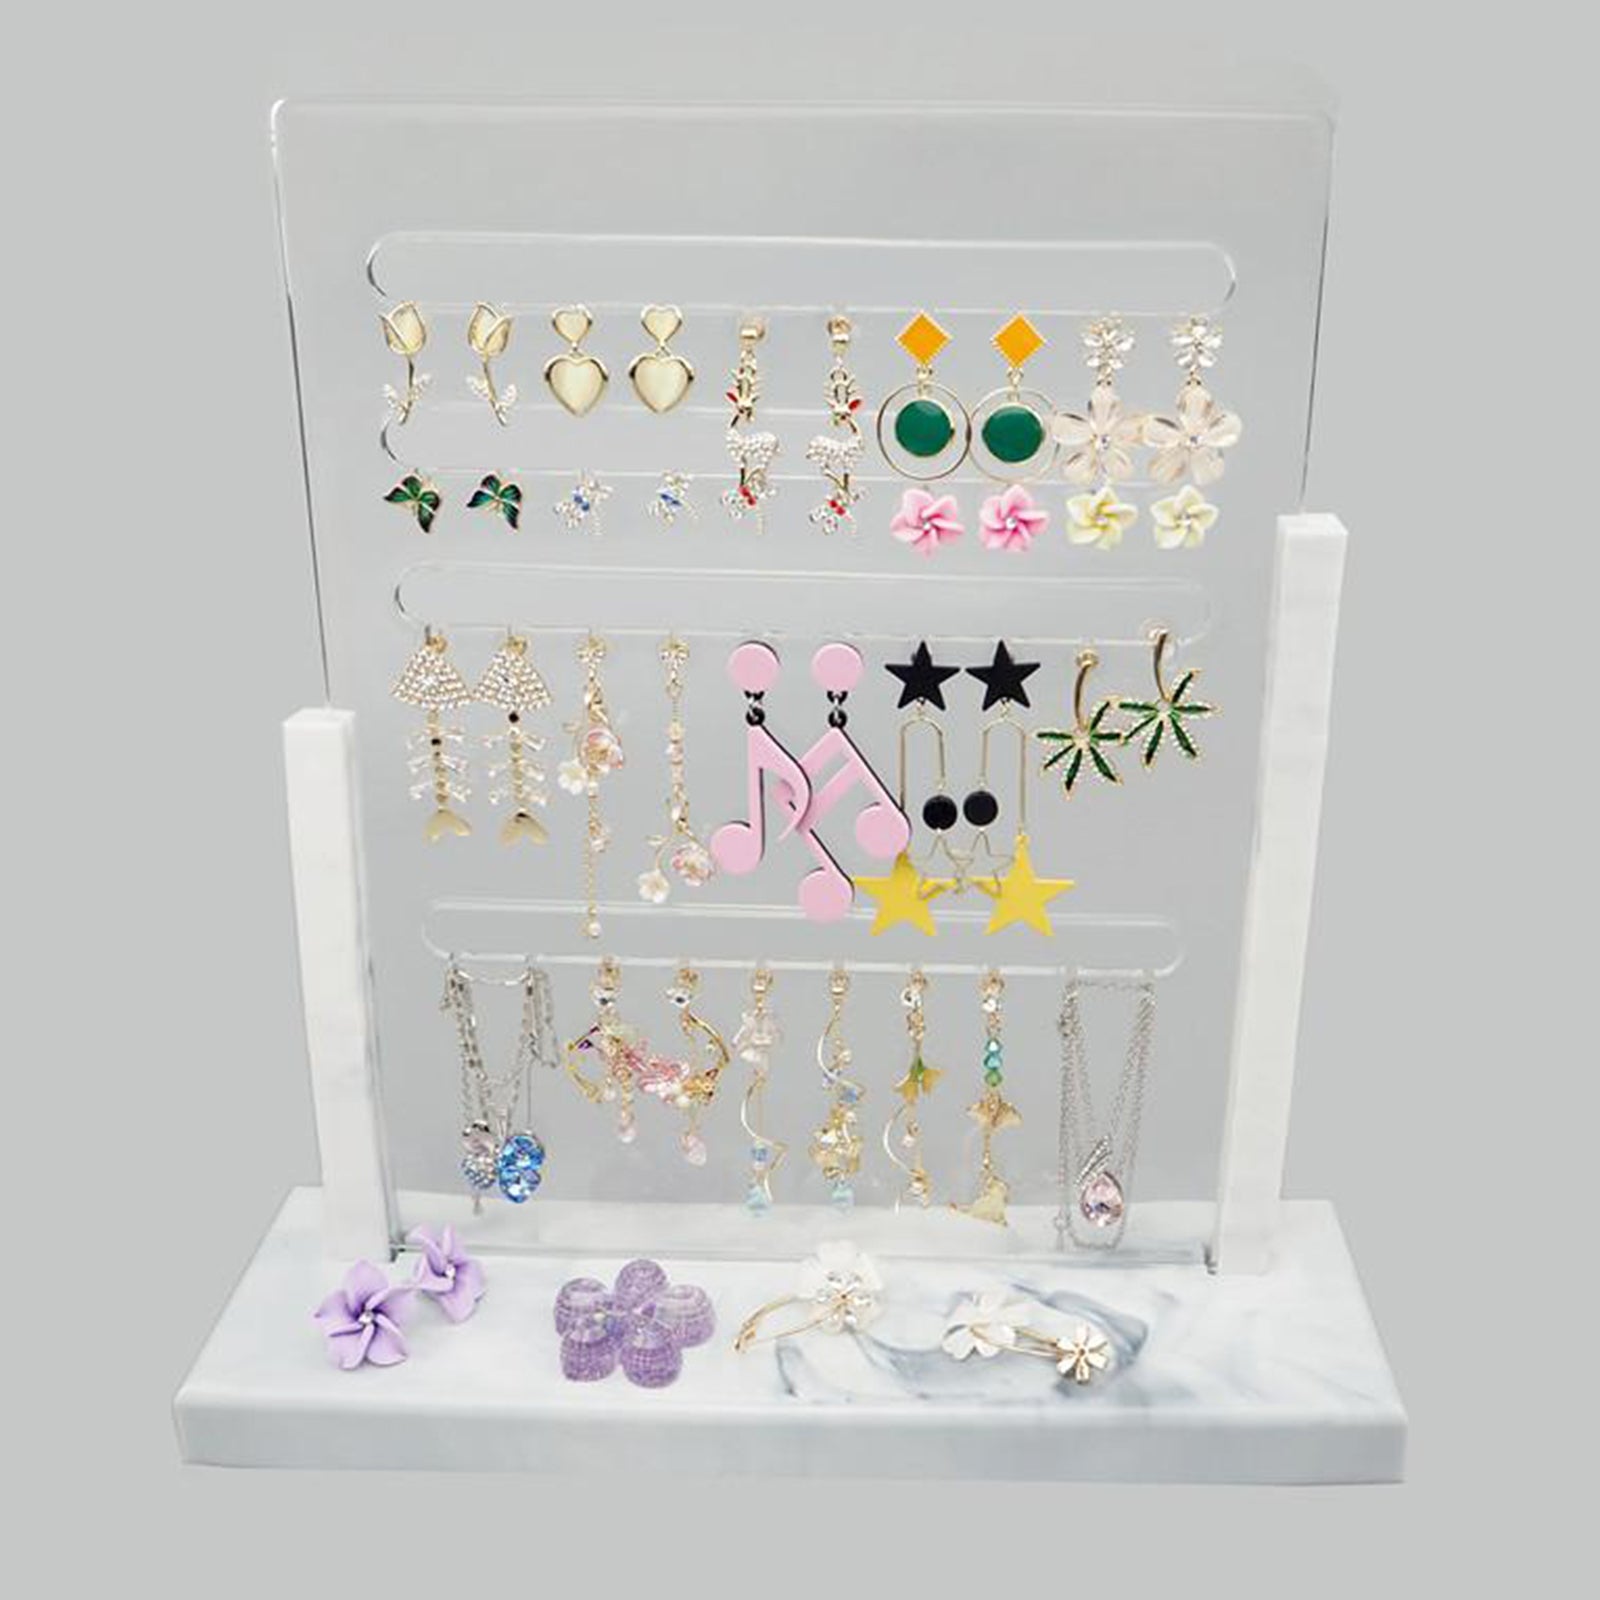 Pendant / Necklace/ Earrings Jewellery Display Stand / Silicone Rack